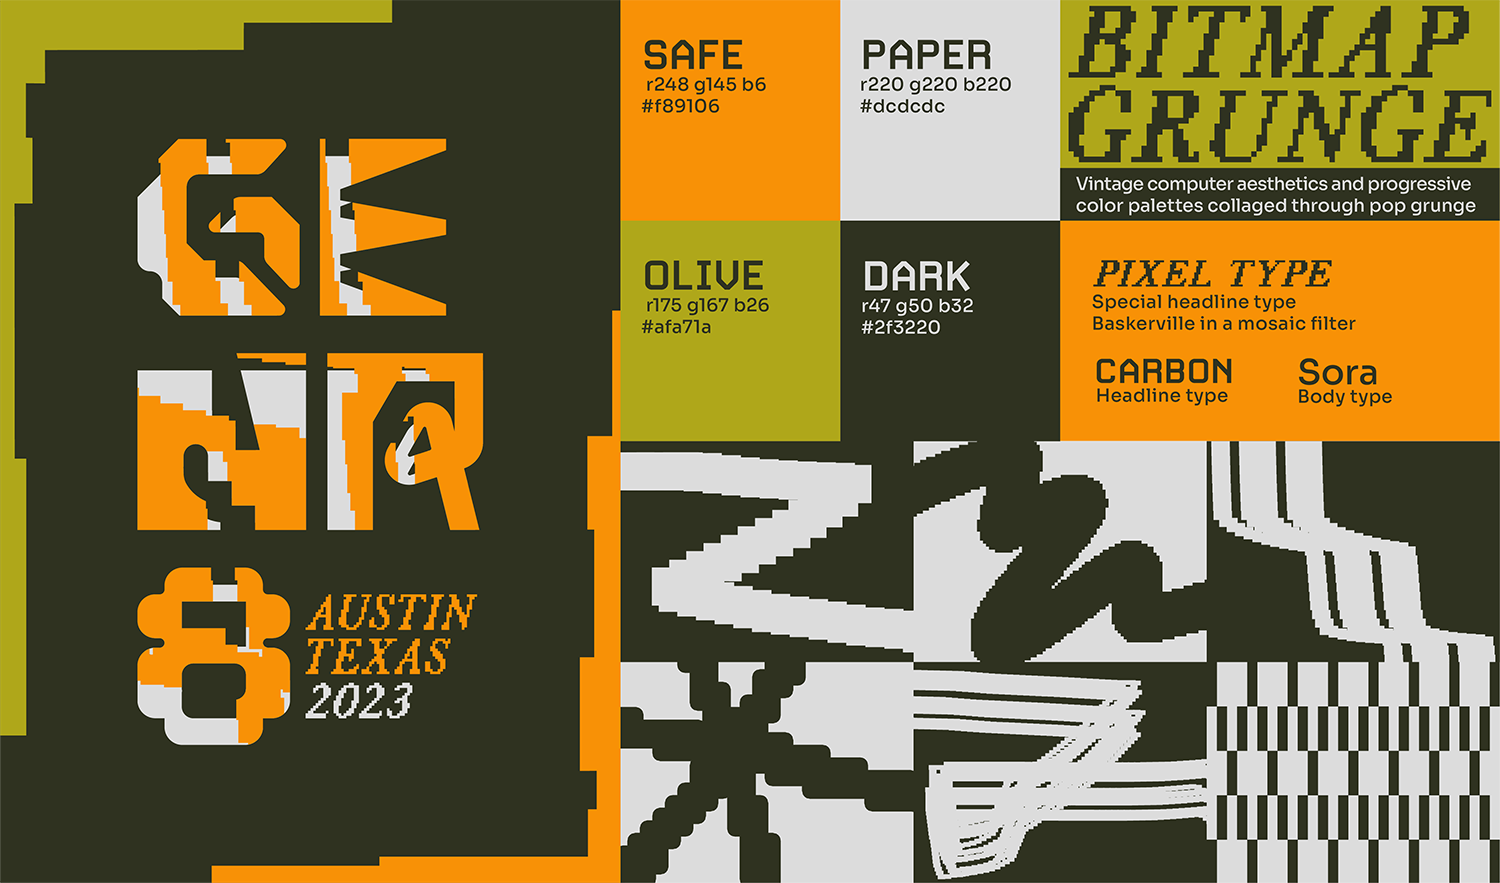 Brand Board divided into three sections. Left section contains the Genr8 Austin Texas 2023 logo in white with orange accents. Top right shows a color palette (Orange, White, Olive, Very Dark Green Black), "Bitmap Grunge- vintage computer aesthetics and progressive color palettes collaged through pop grunge", and a section of typography using a pixelated serif font, Carbon for headlines, and Sora for body type. Bottom left are graphic assets set in black and white checkerboard- mostly pixelated brushes and blocky patterns.